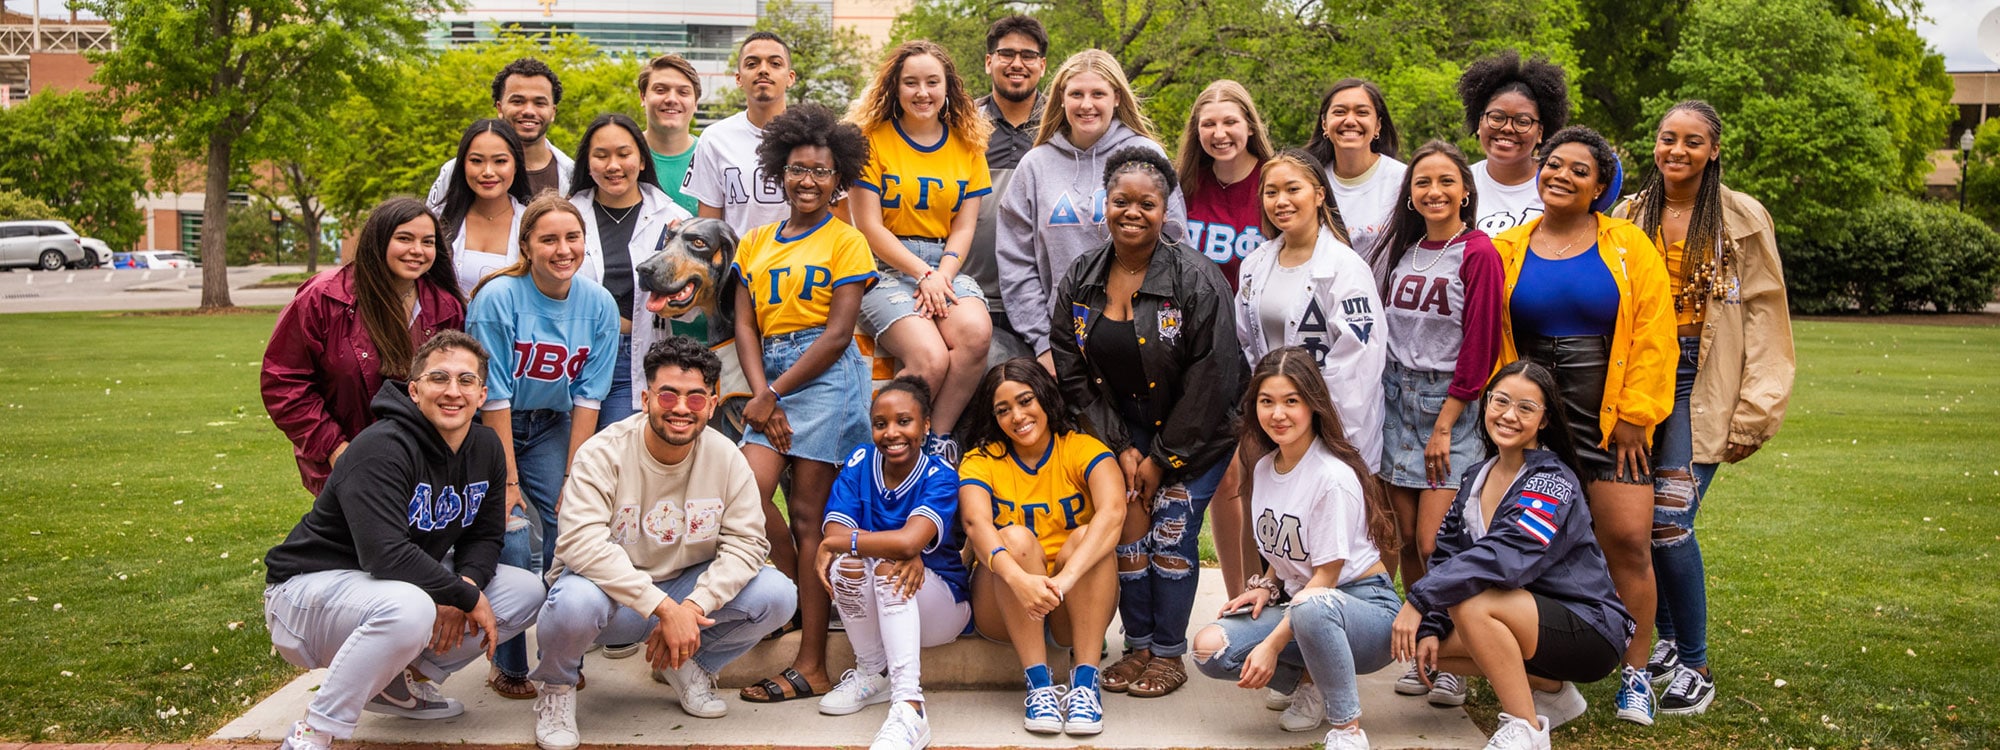 Fraternity and Sorority students posing together